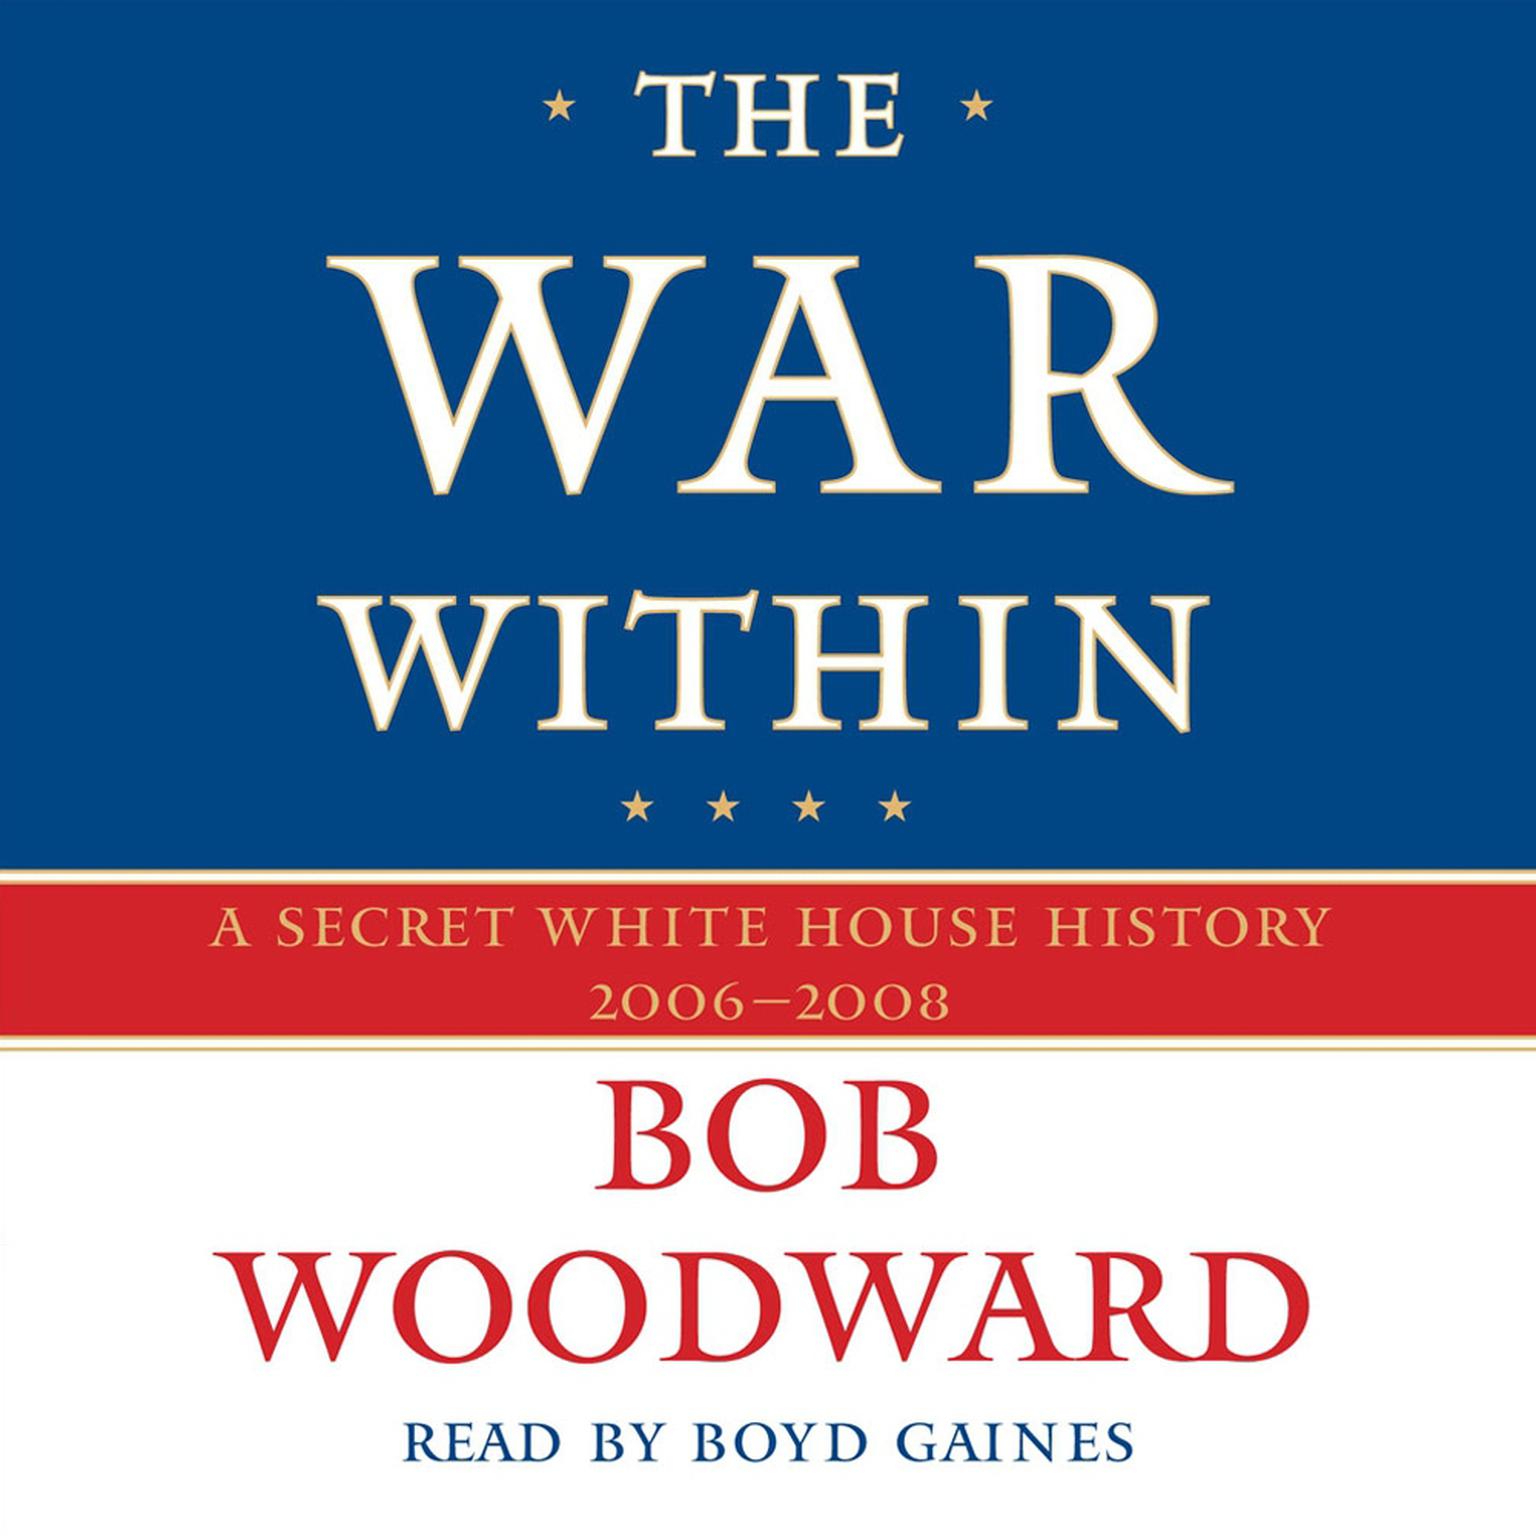 The War Within (Abridged): A Secret White House History 2006-2008 Audiobook, by Bob Woodward